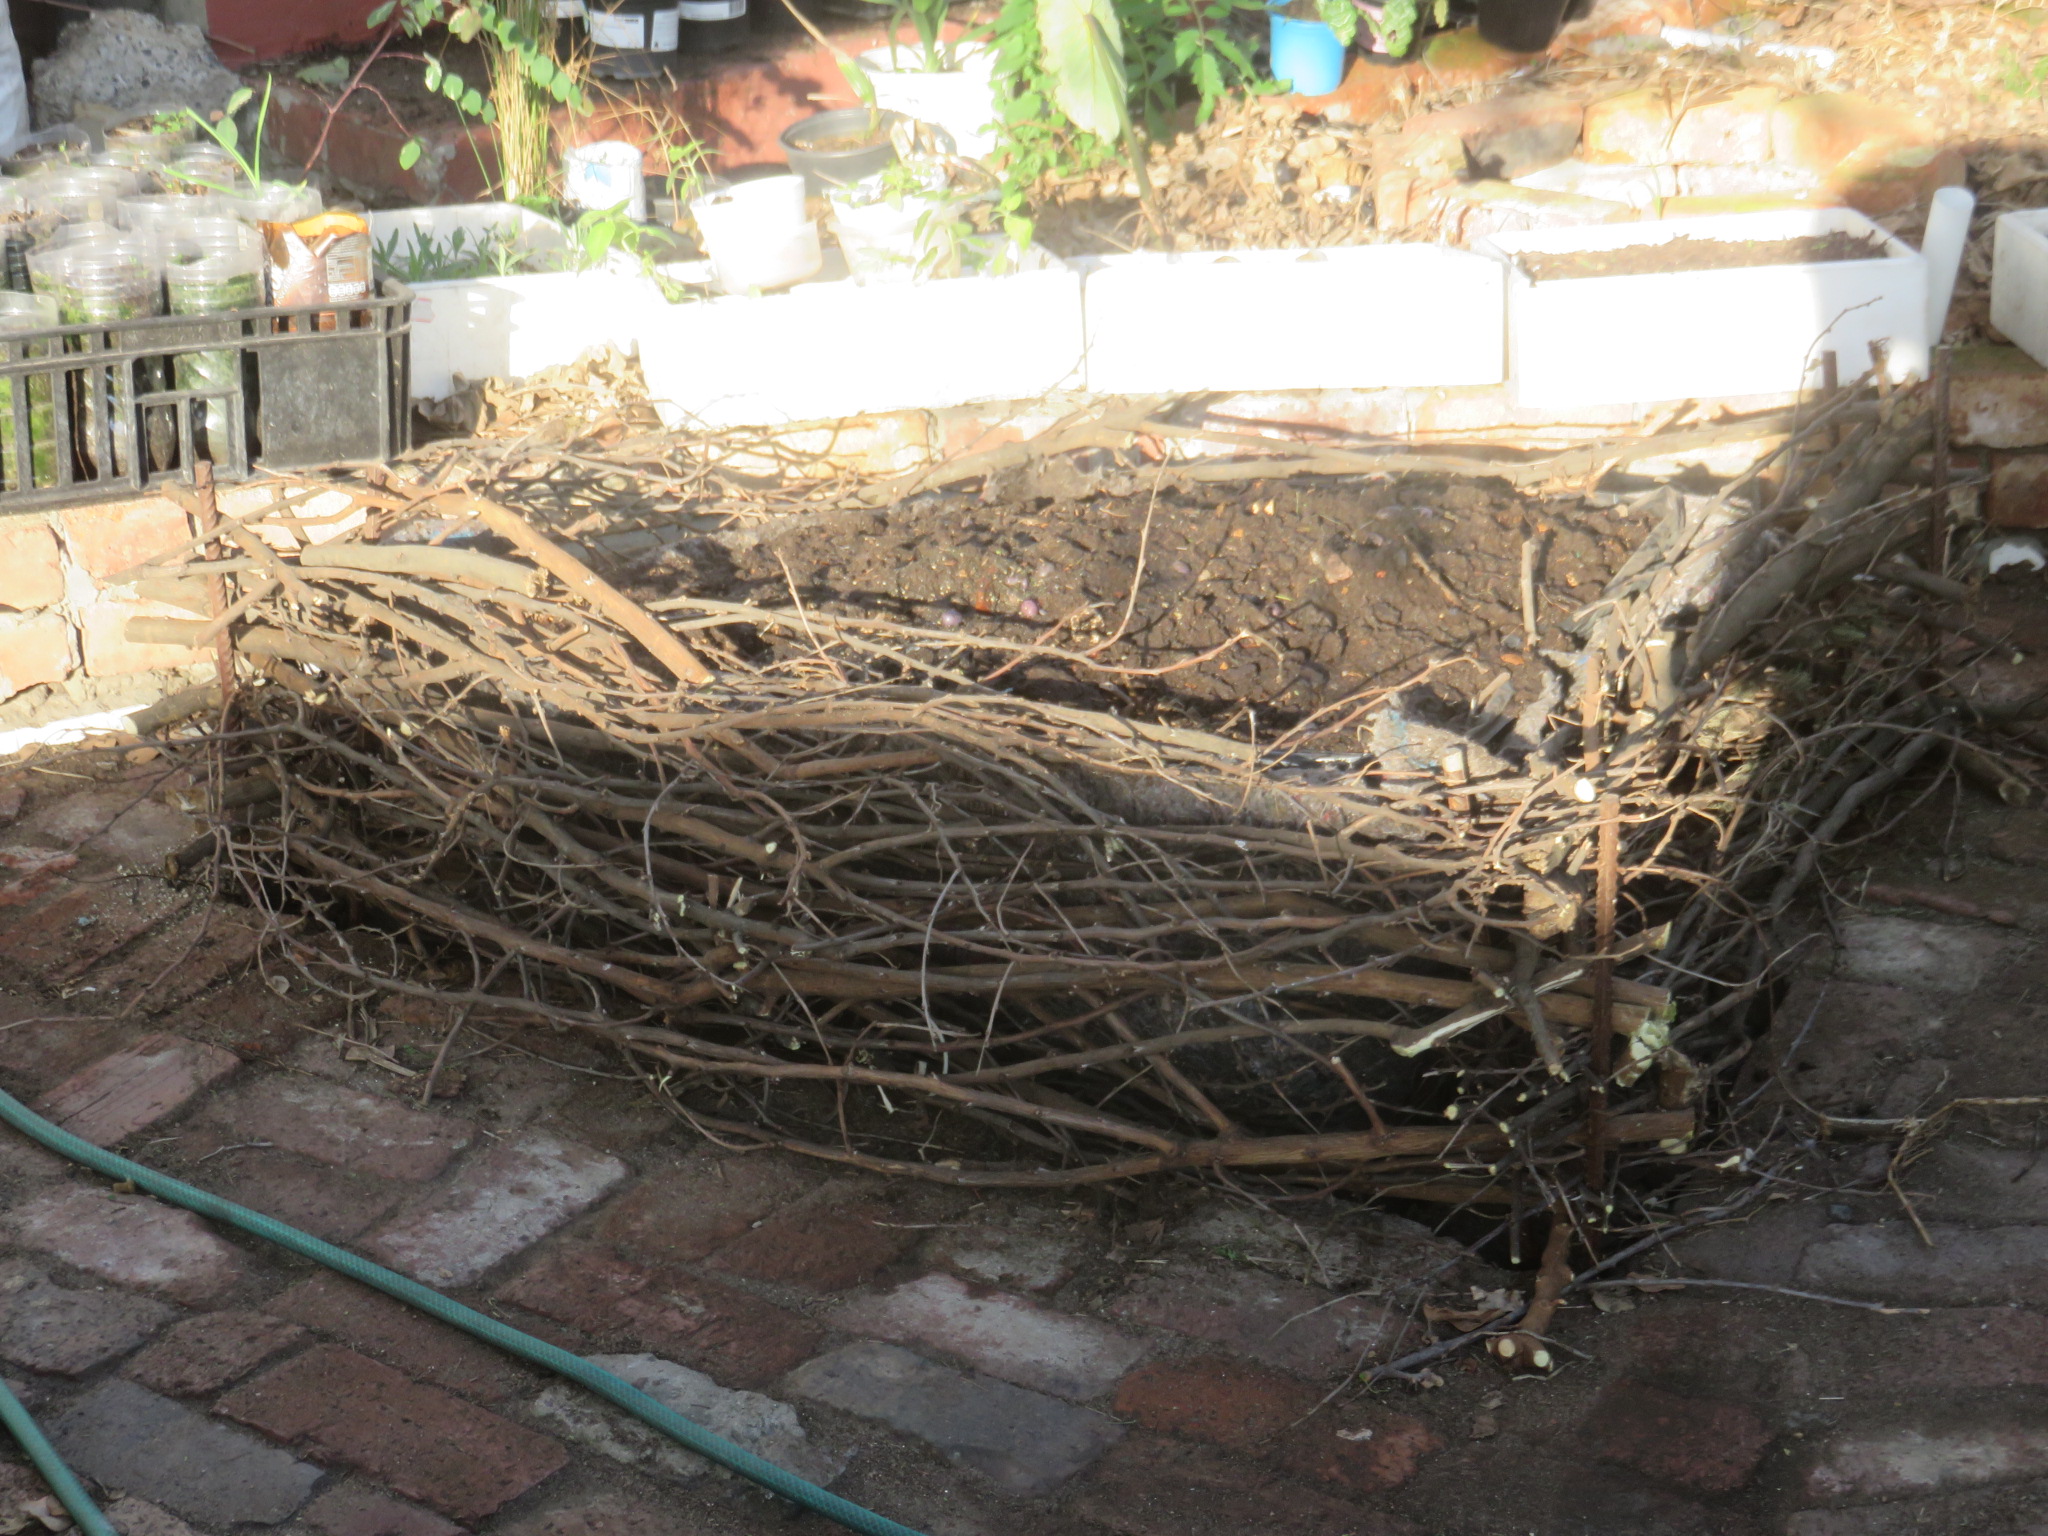 A bird's nest raised bed, built in a few hours from refuse, rags and rebar. Made to house asparagus, it is also insect friendly.